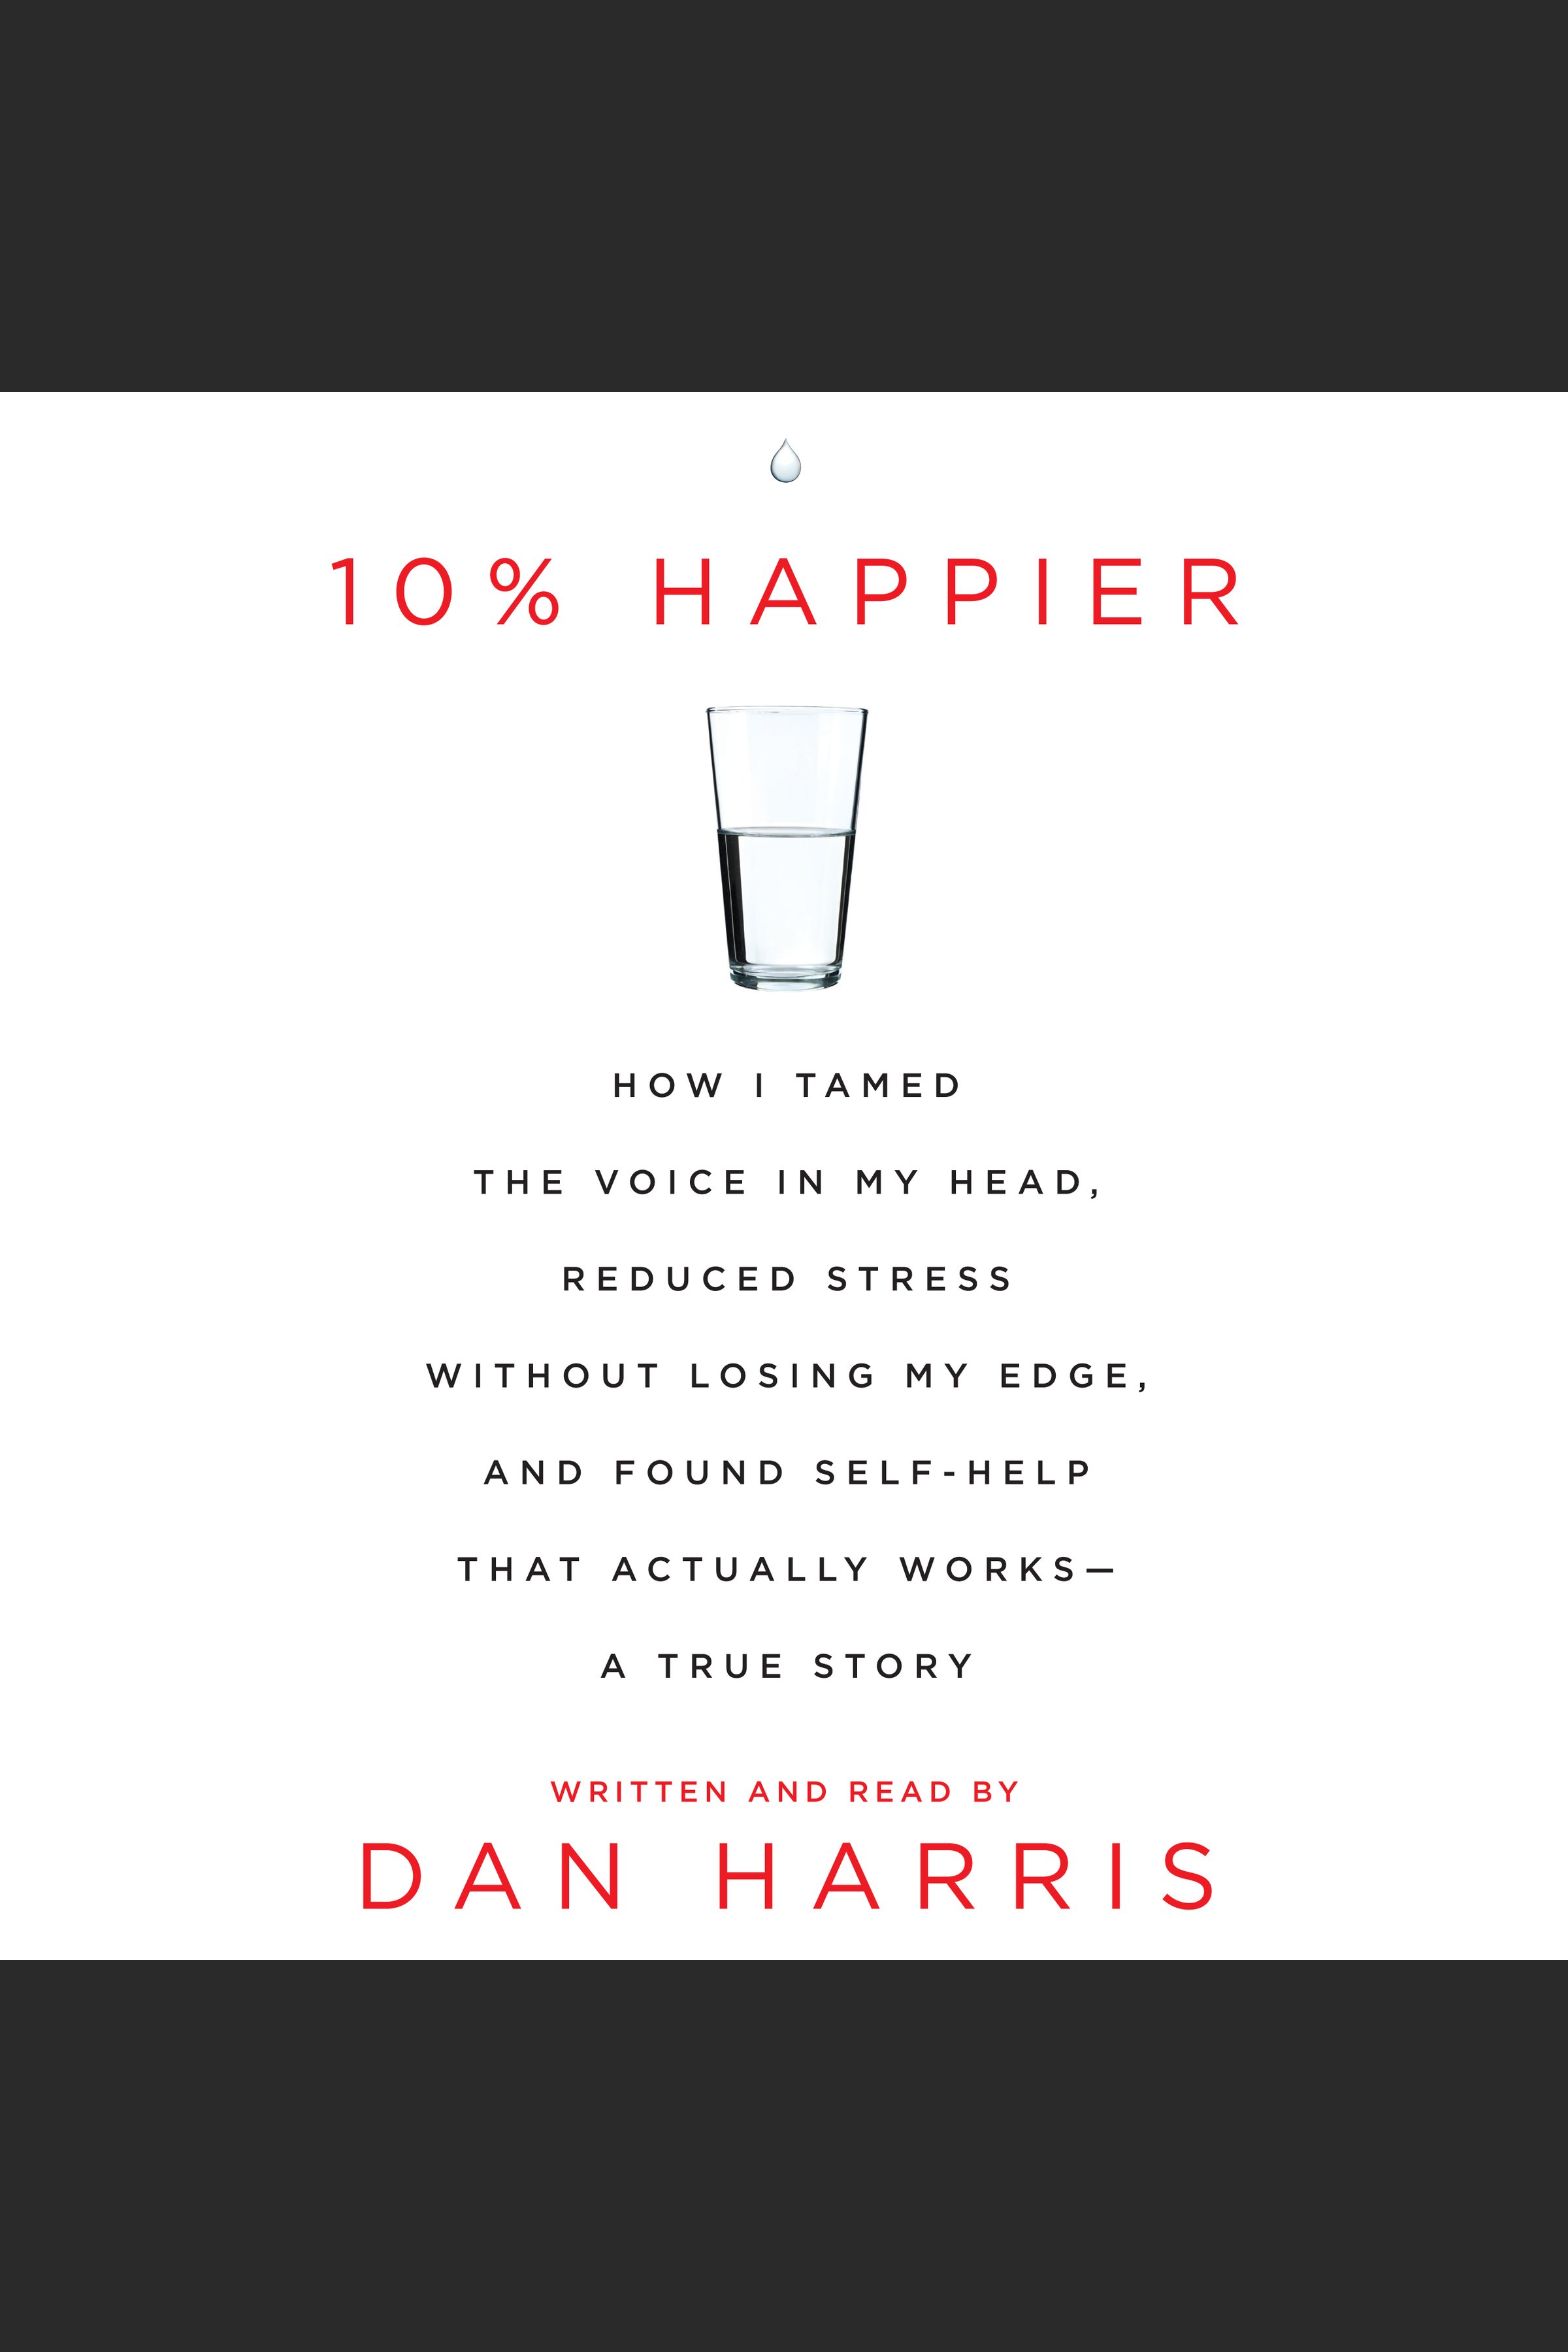 10% Happier how I tamed the voice in my head, reduced stress without losing my edge, and found a self-help that actually works:a true story cover image